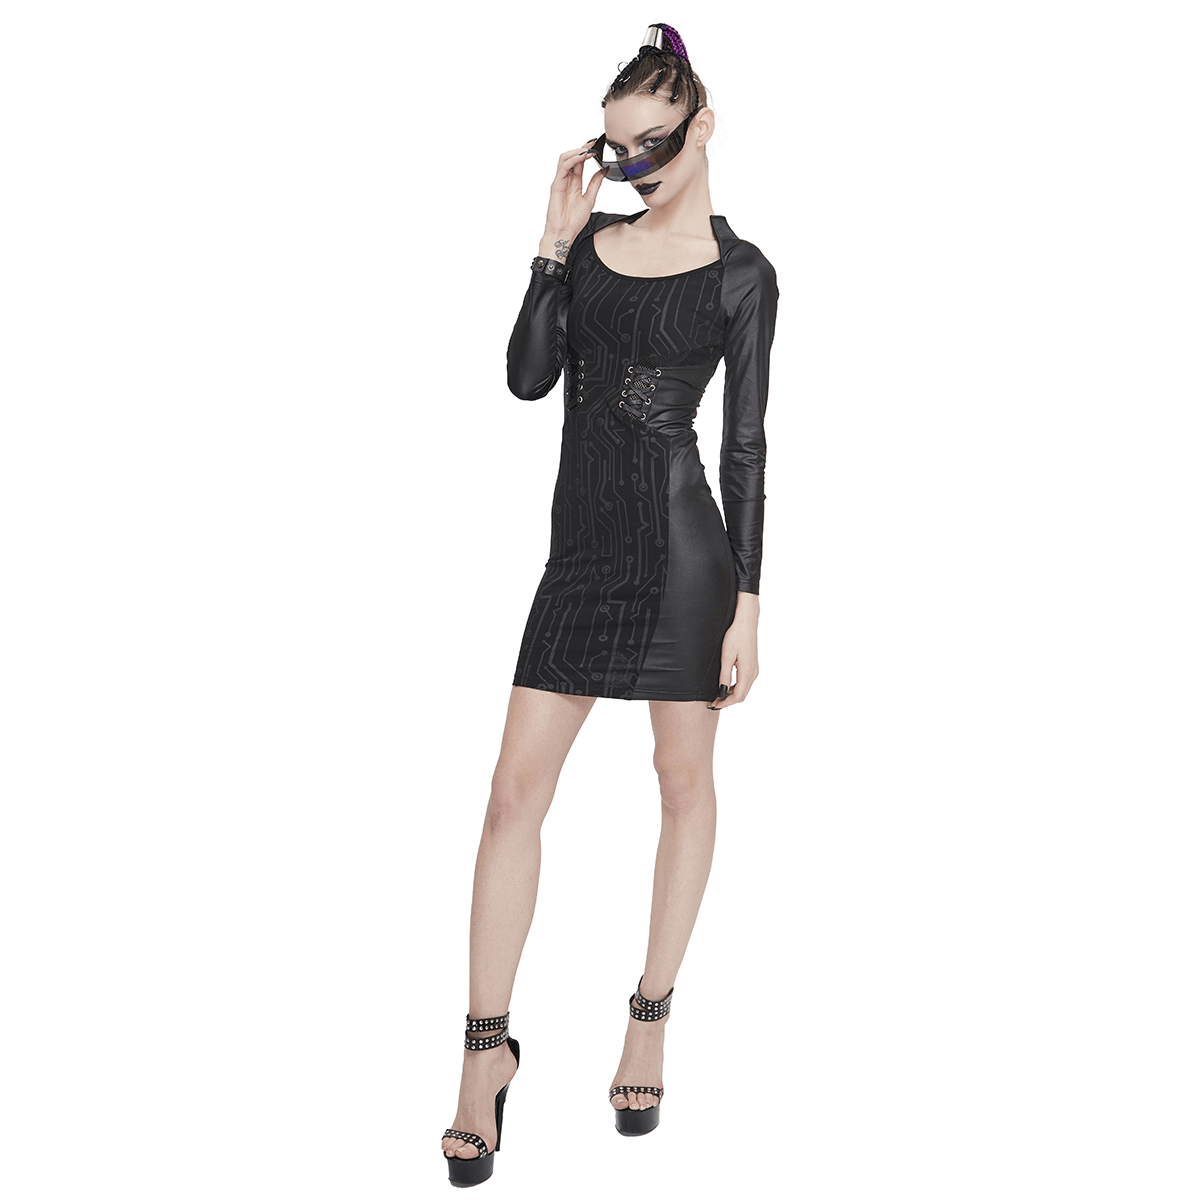 Black Long Sleeve Mini Dress / Dress in Gothic Style with Lace-up Waist - HARD'N'HEAVY